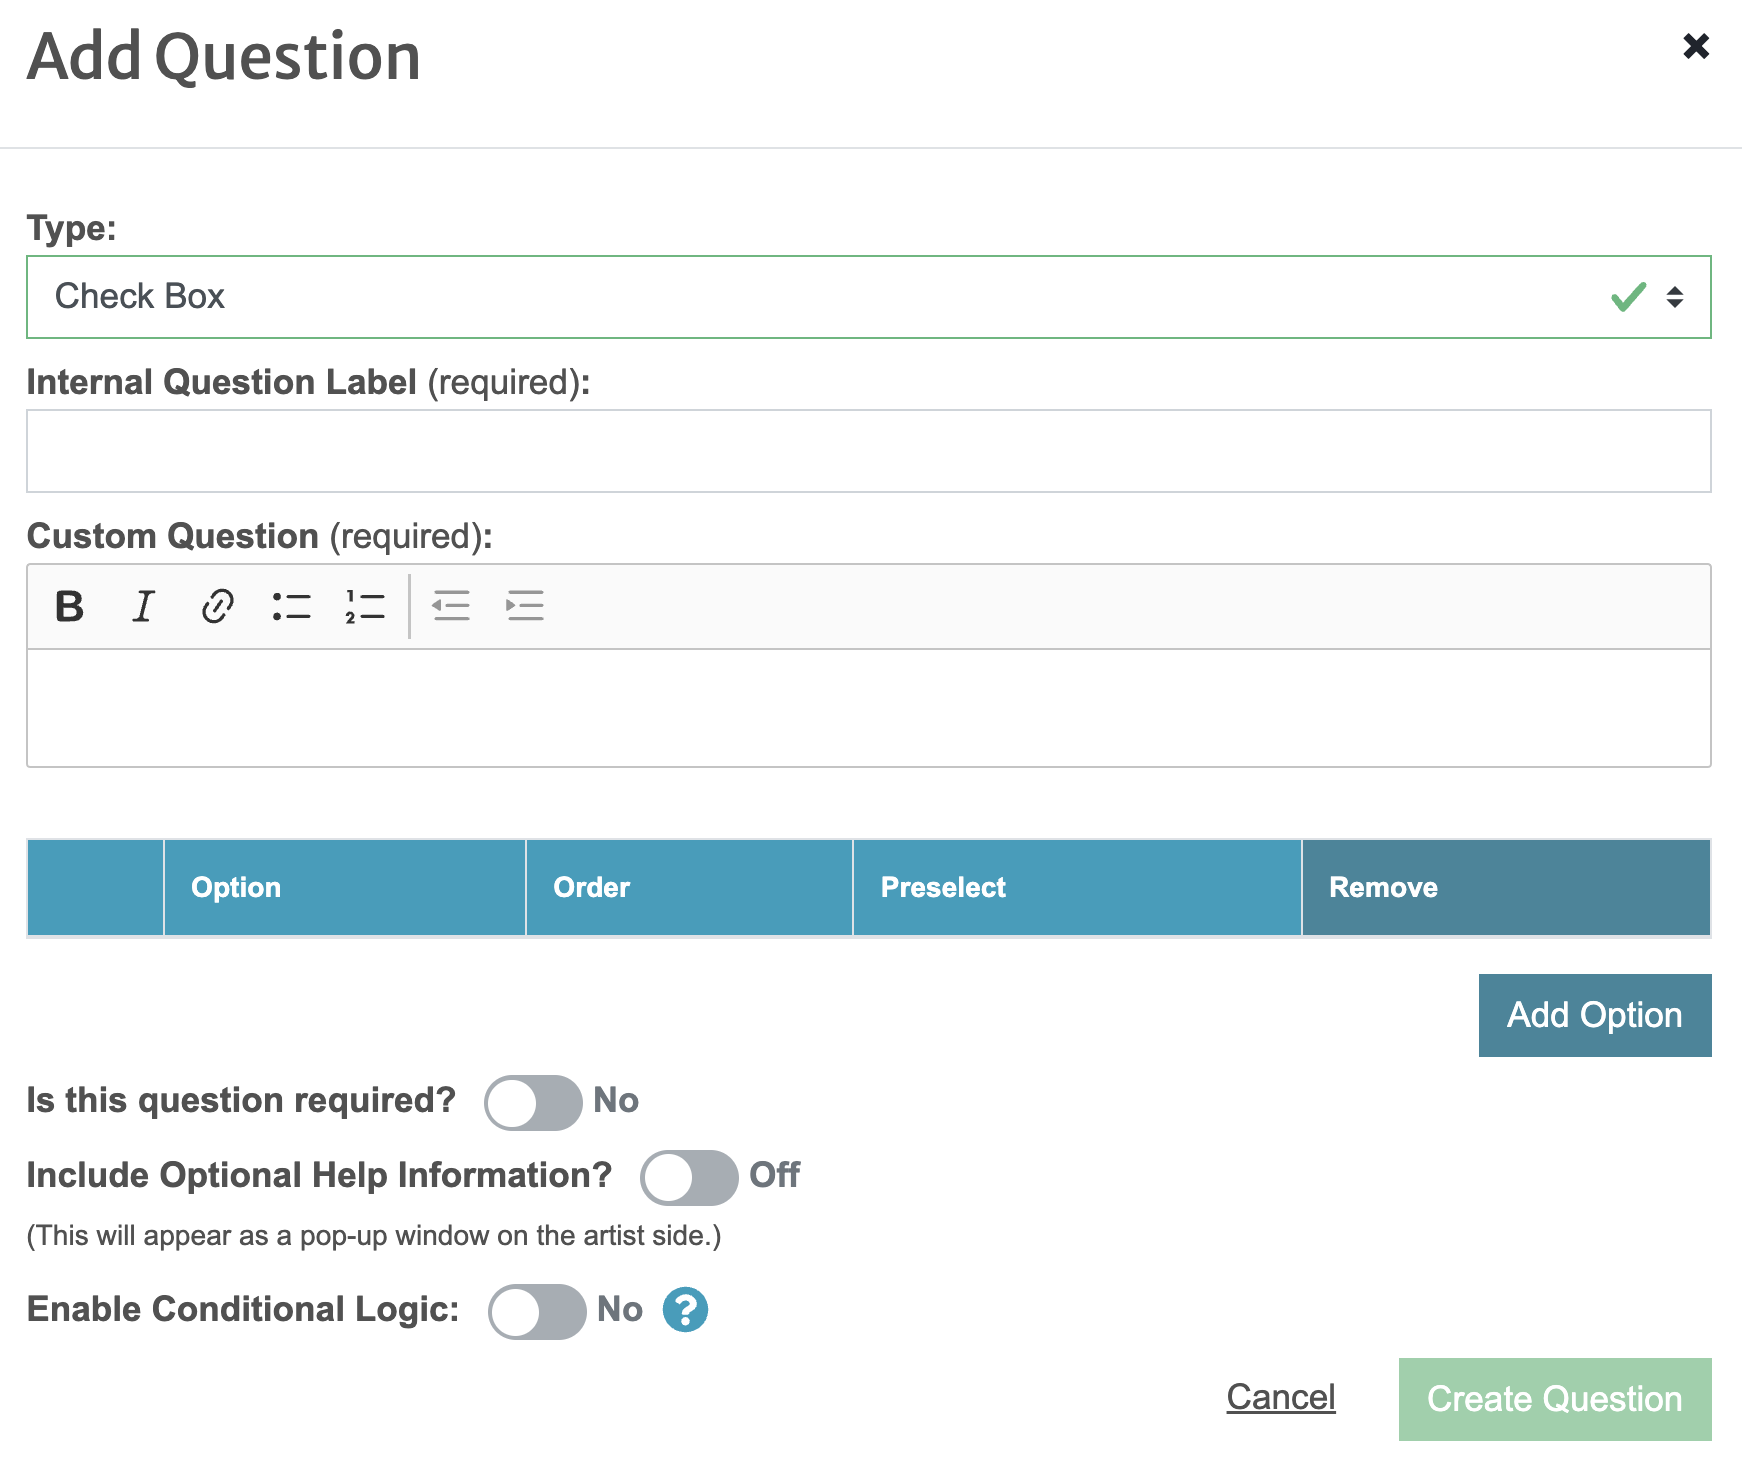 Screenshot of the adding question where users can choose the question type, write the question, and include options for applicants.